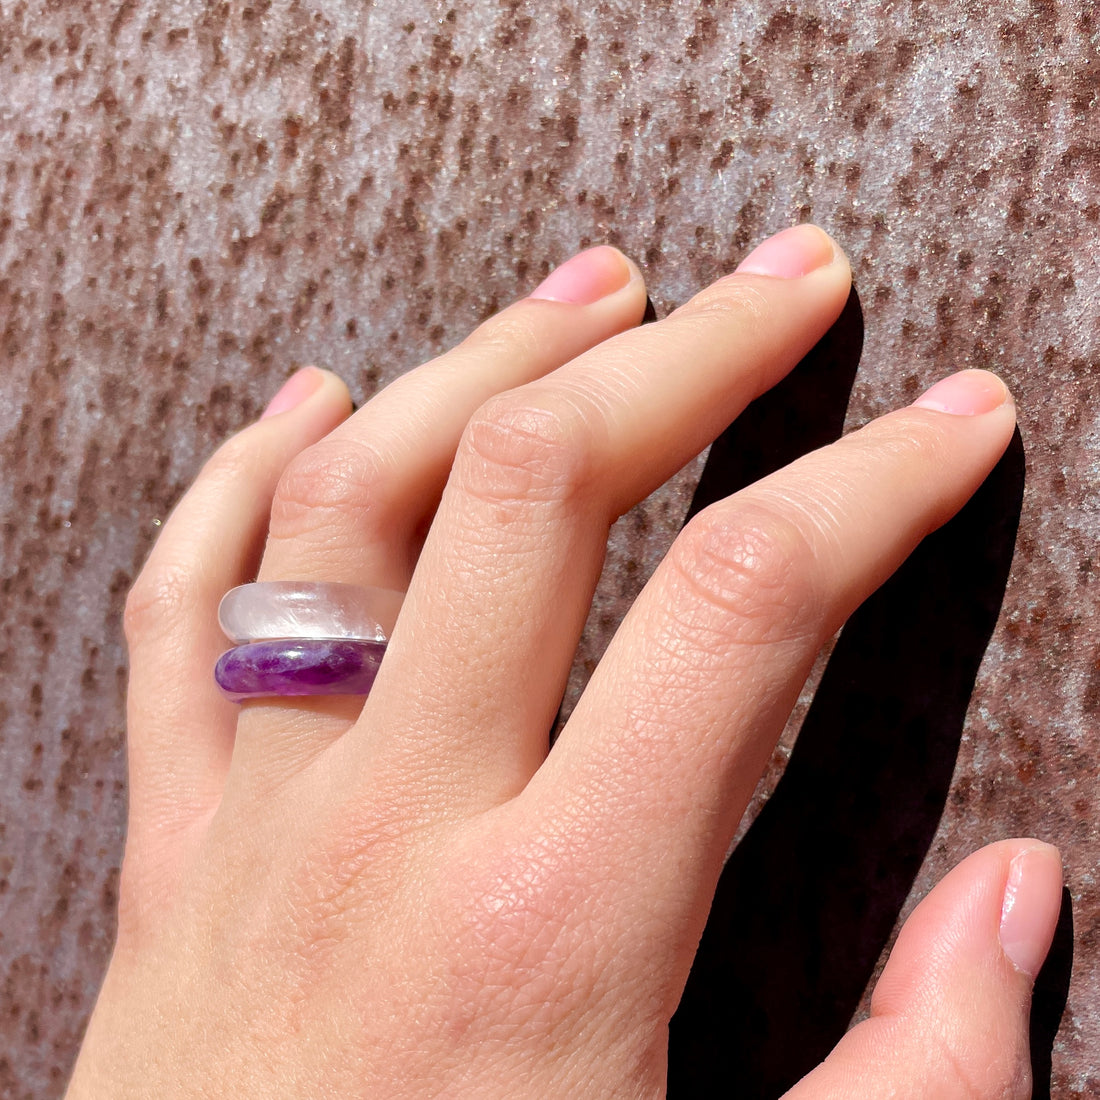 caruba white quartz stone band ring from whitestone jewelry co worn with amethyst ring by woman